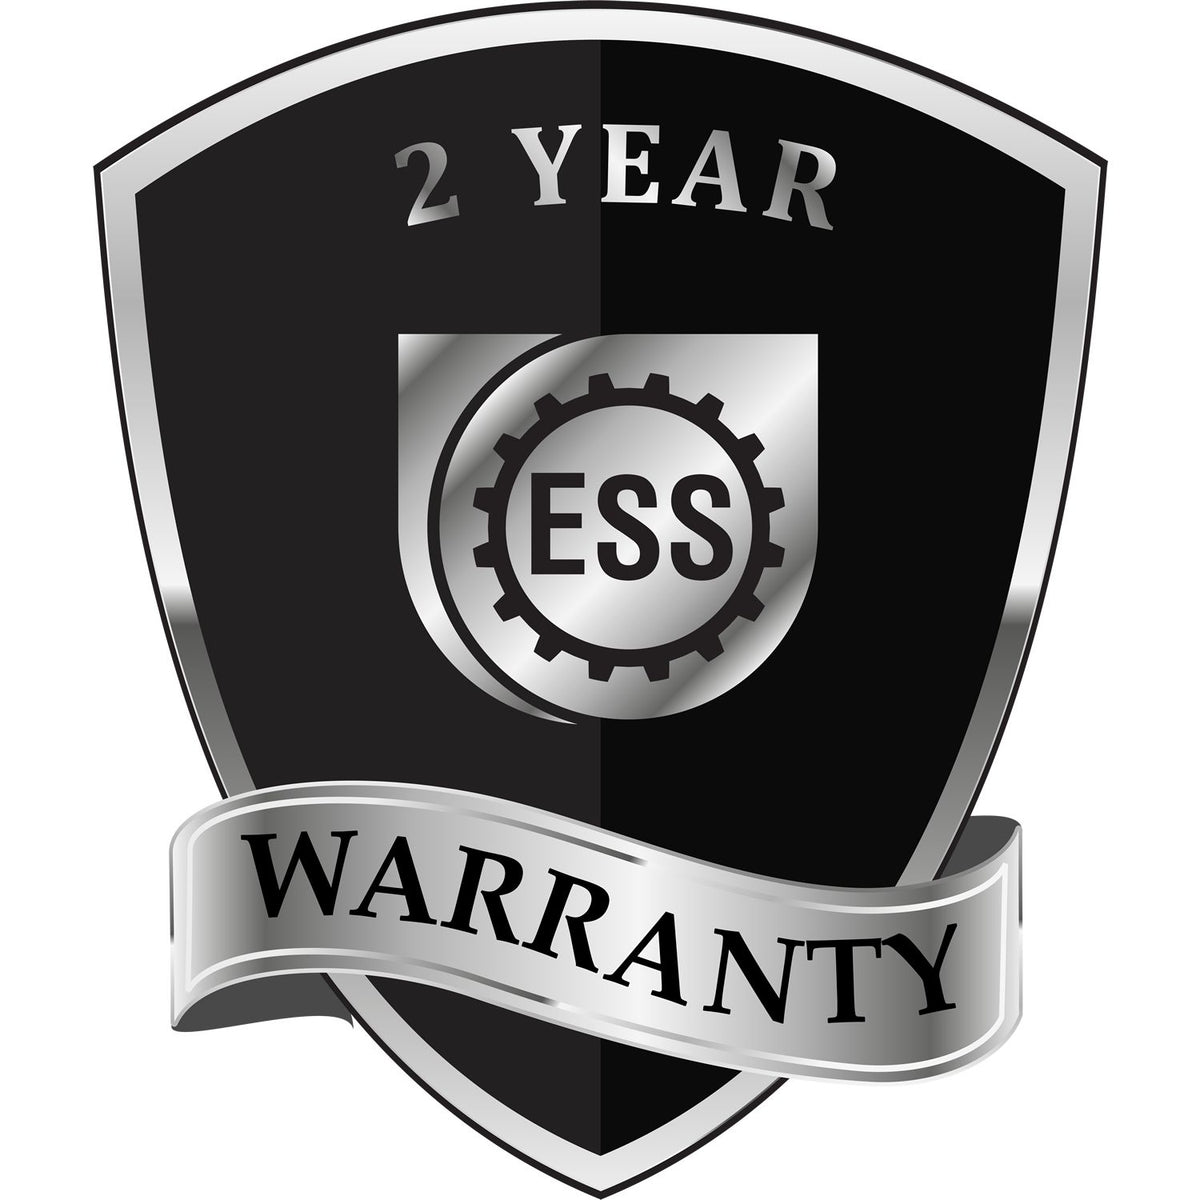 A black and silver badge or emblem showing warranty information for the Gift Colorado Geologist Seal